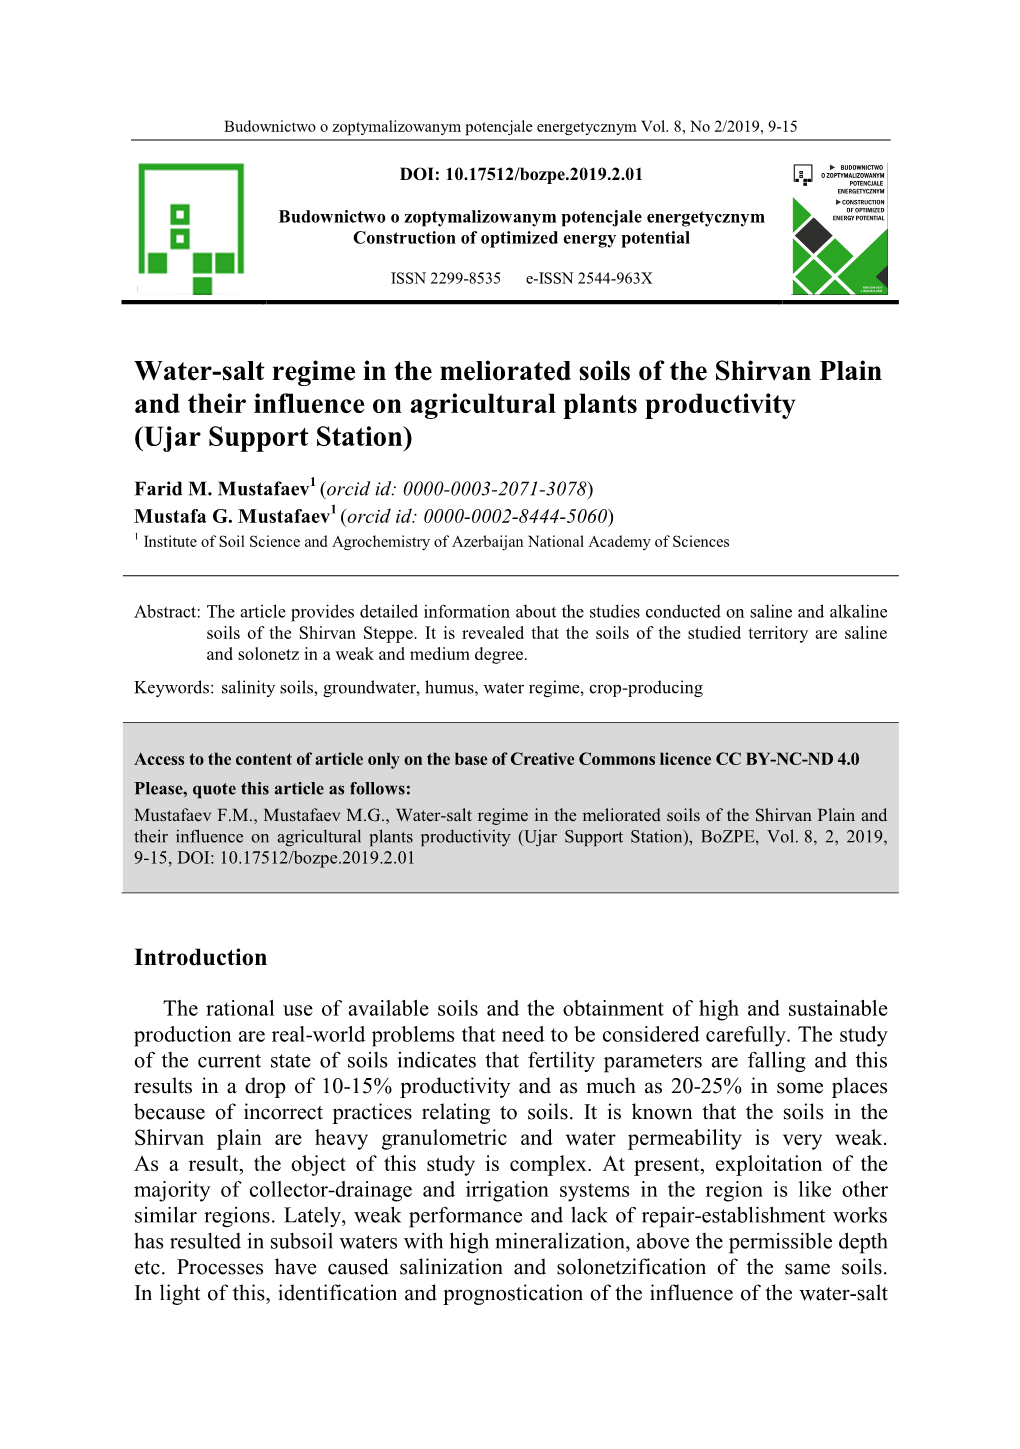 Water-Salt Regime in the Meliorated Soils of the Shirvan Plain and Their Influence on Agricultural Plants Productivity (Ujar Support Station)